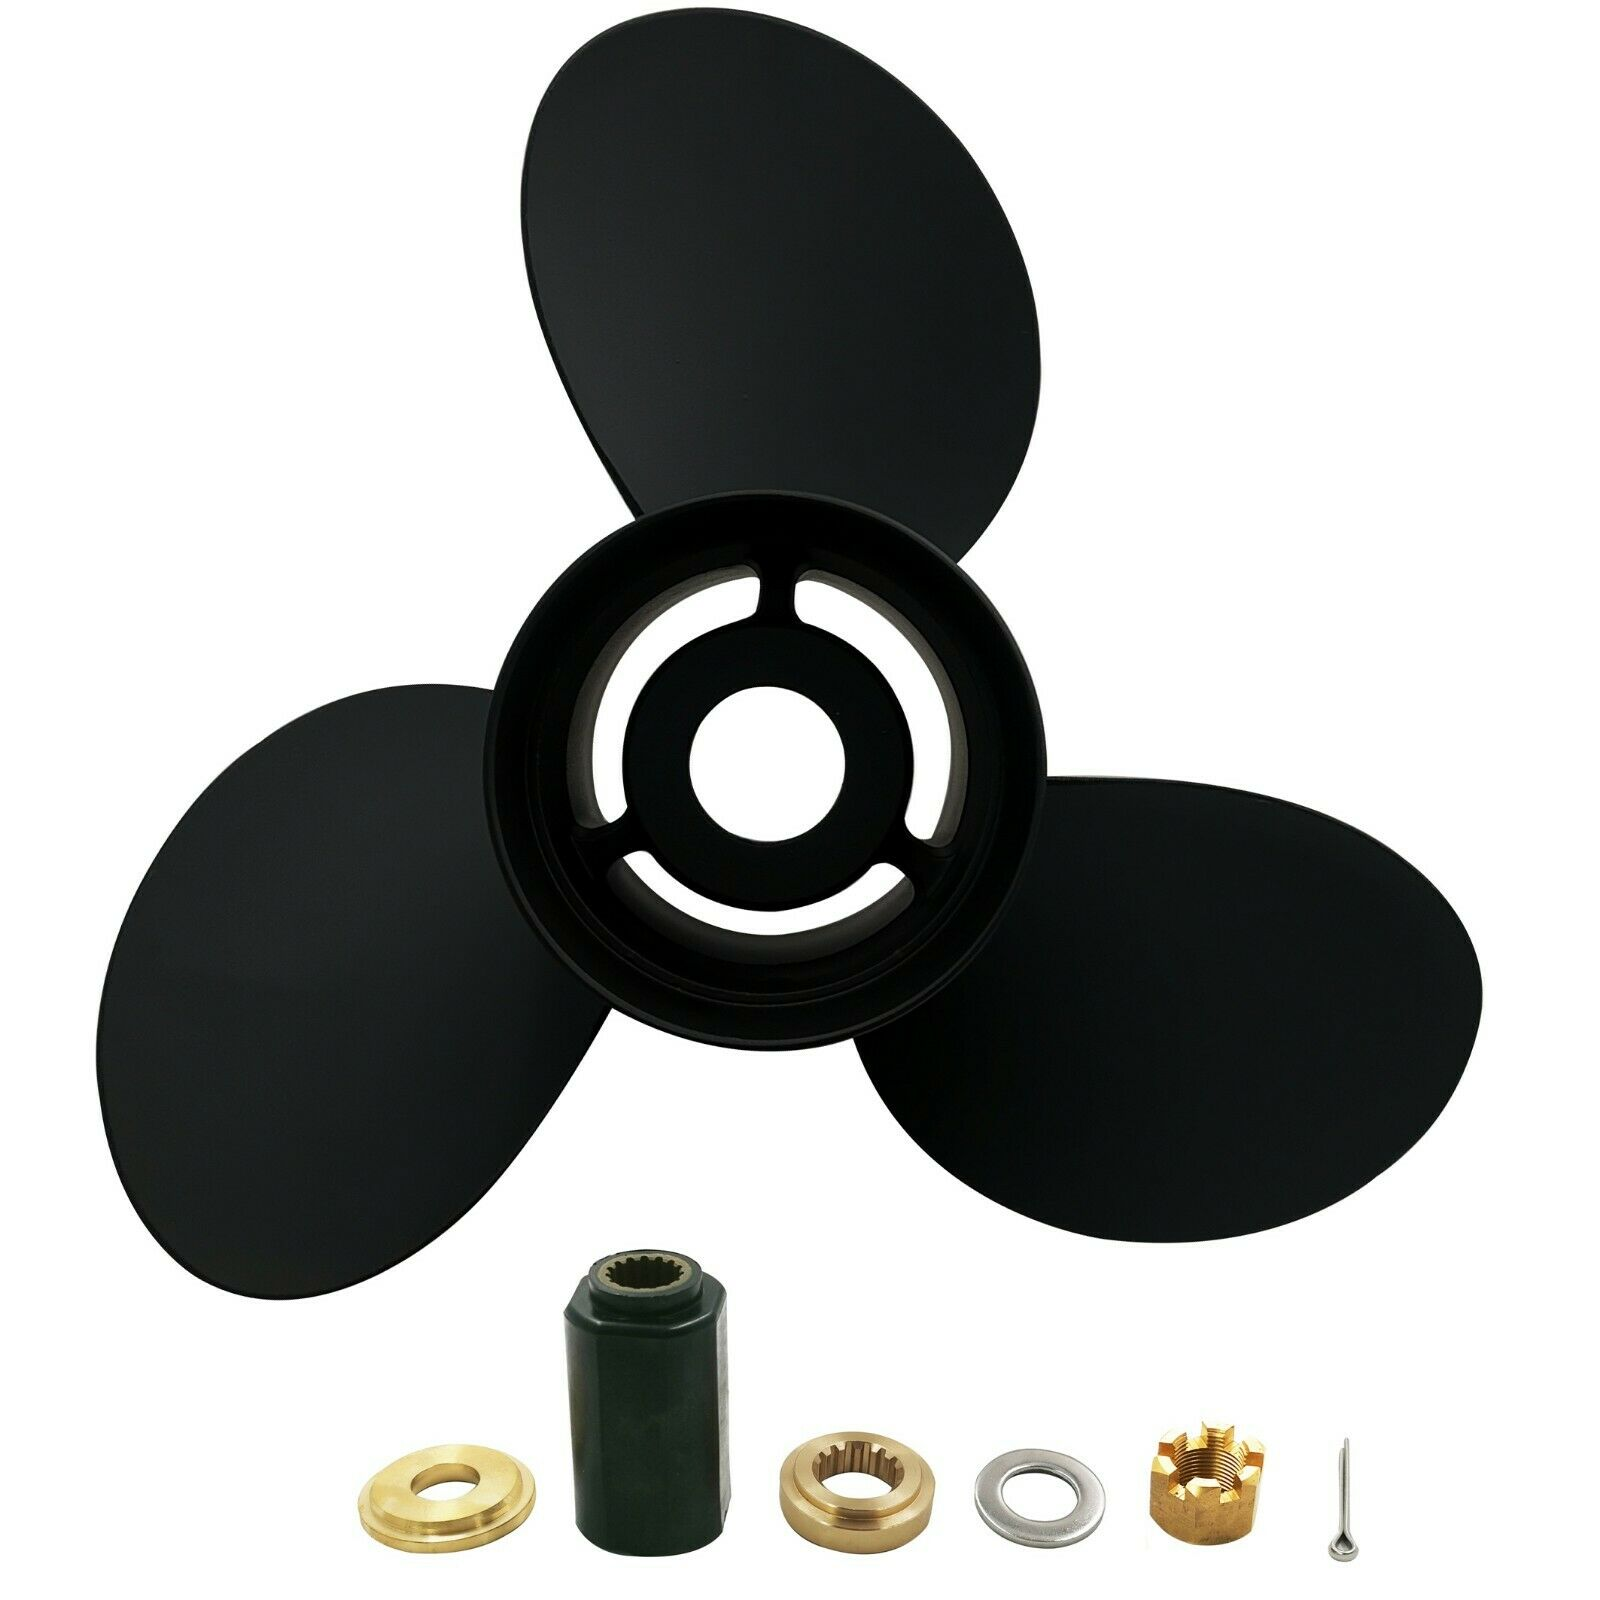 13.5 x 15 Aluminum Propeller For Tohatsu Nissan Outboard Engine 3HKB64532-0